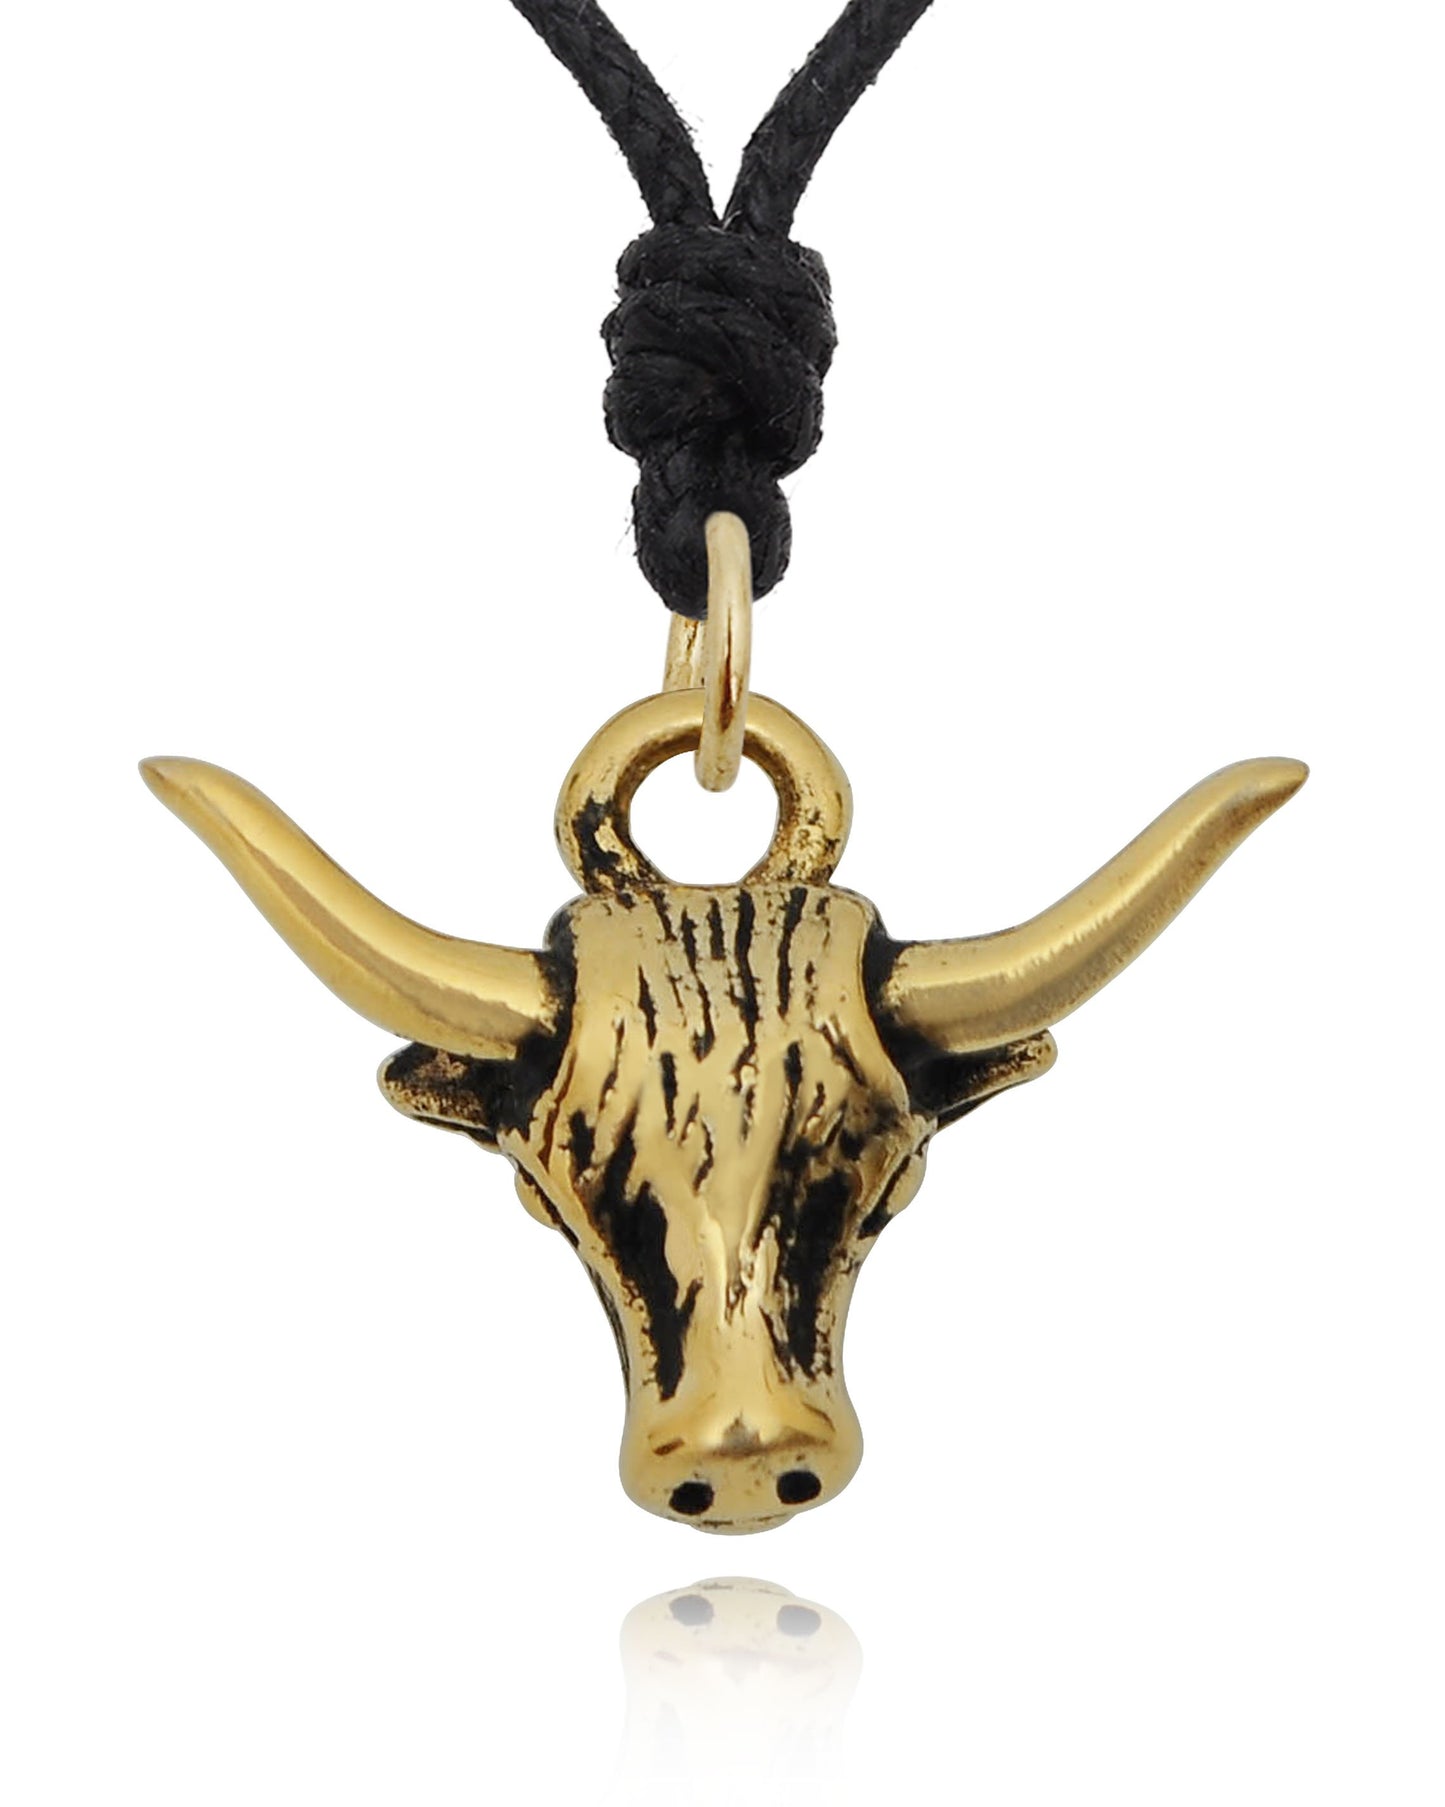 Texas Longhorn 92.5 Sterling Silver Pewter Brass Charm Necklace Pendant Jewelry